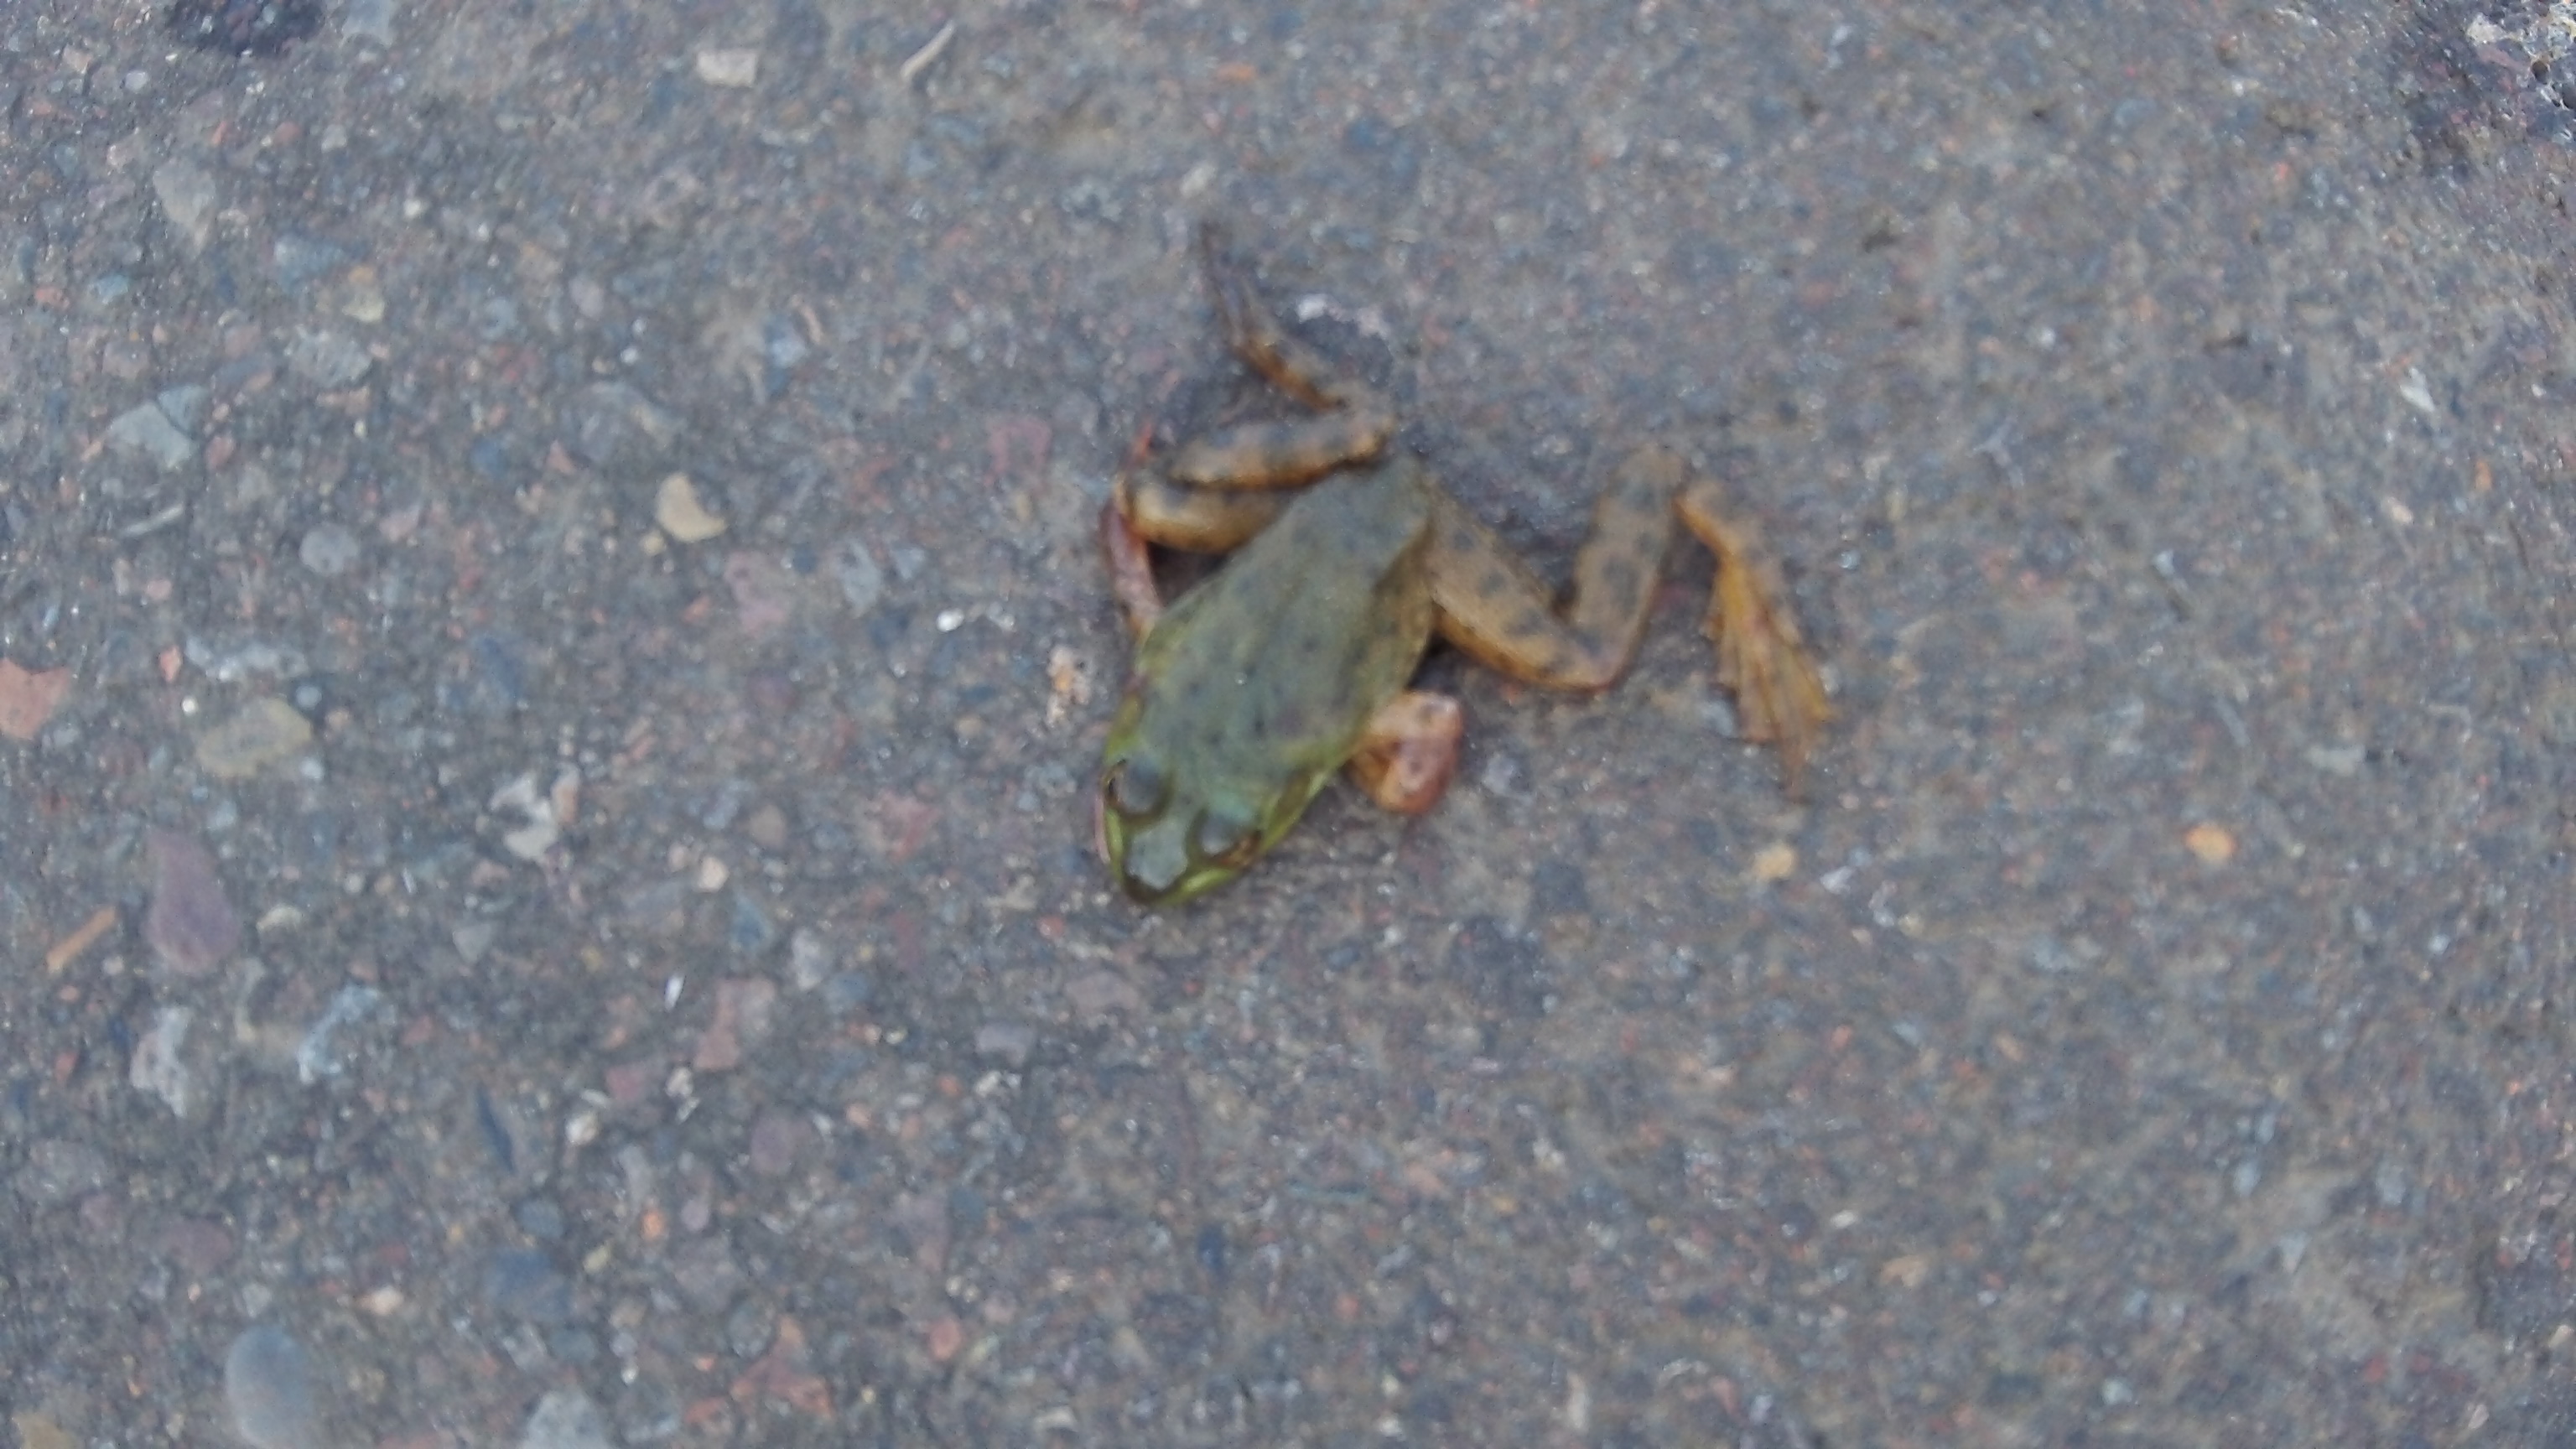 Dead frogs on the street … – Hasso Hering